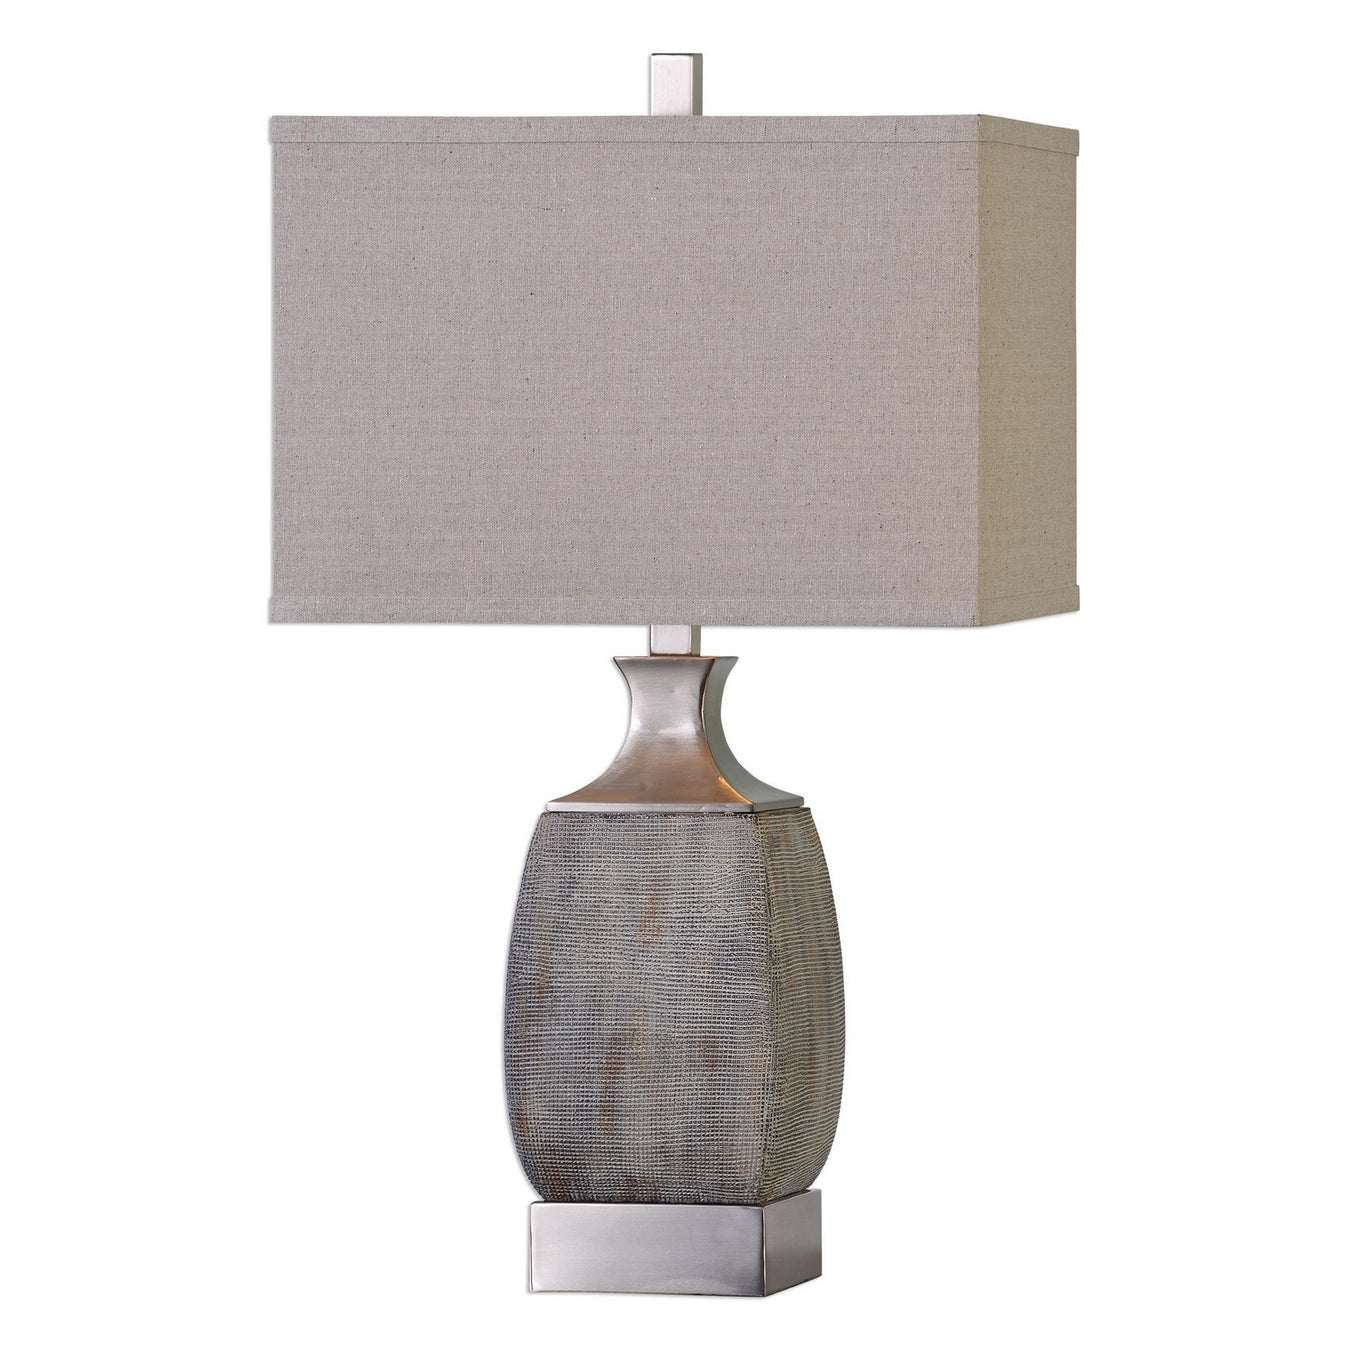 Uttermost's Caffaro Rust Bronze Table Lamp Designed by Billy Moon